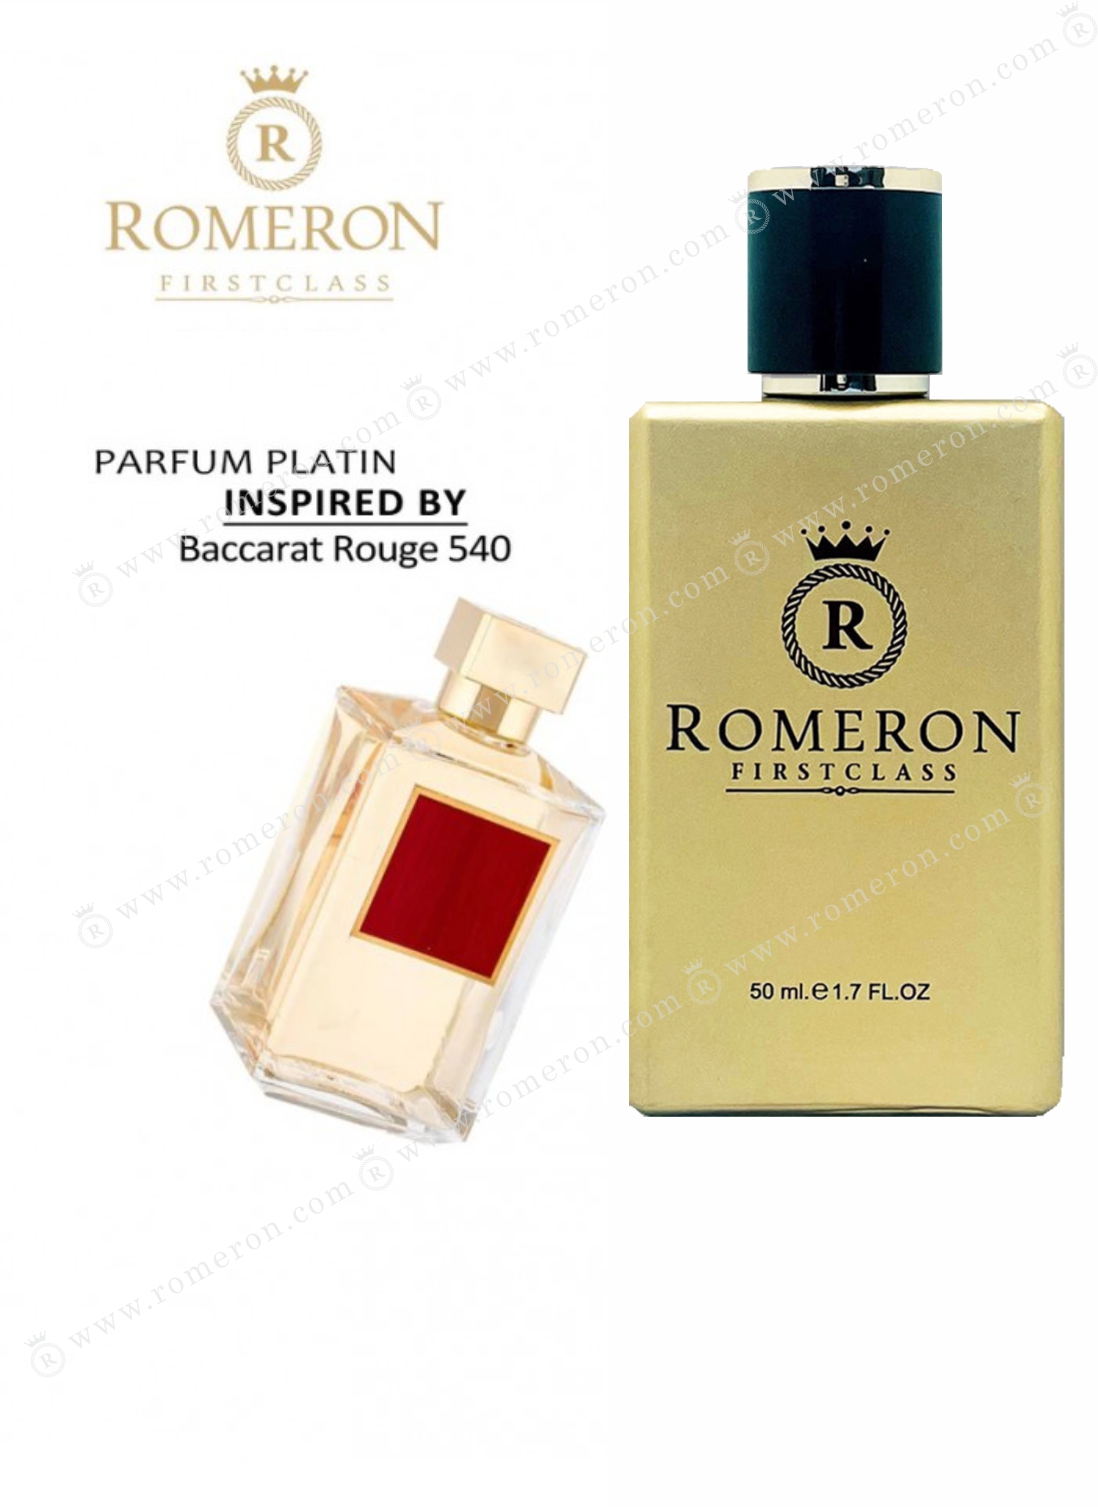 Romeron luxury Perfumes and Fragrances inspired by